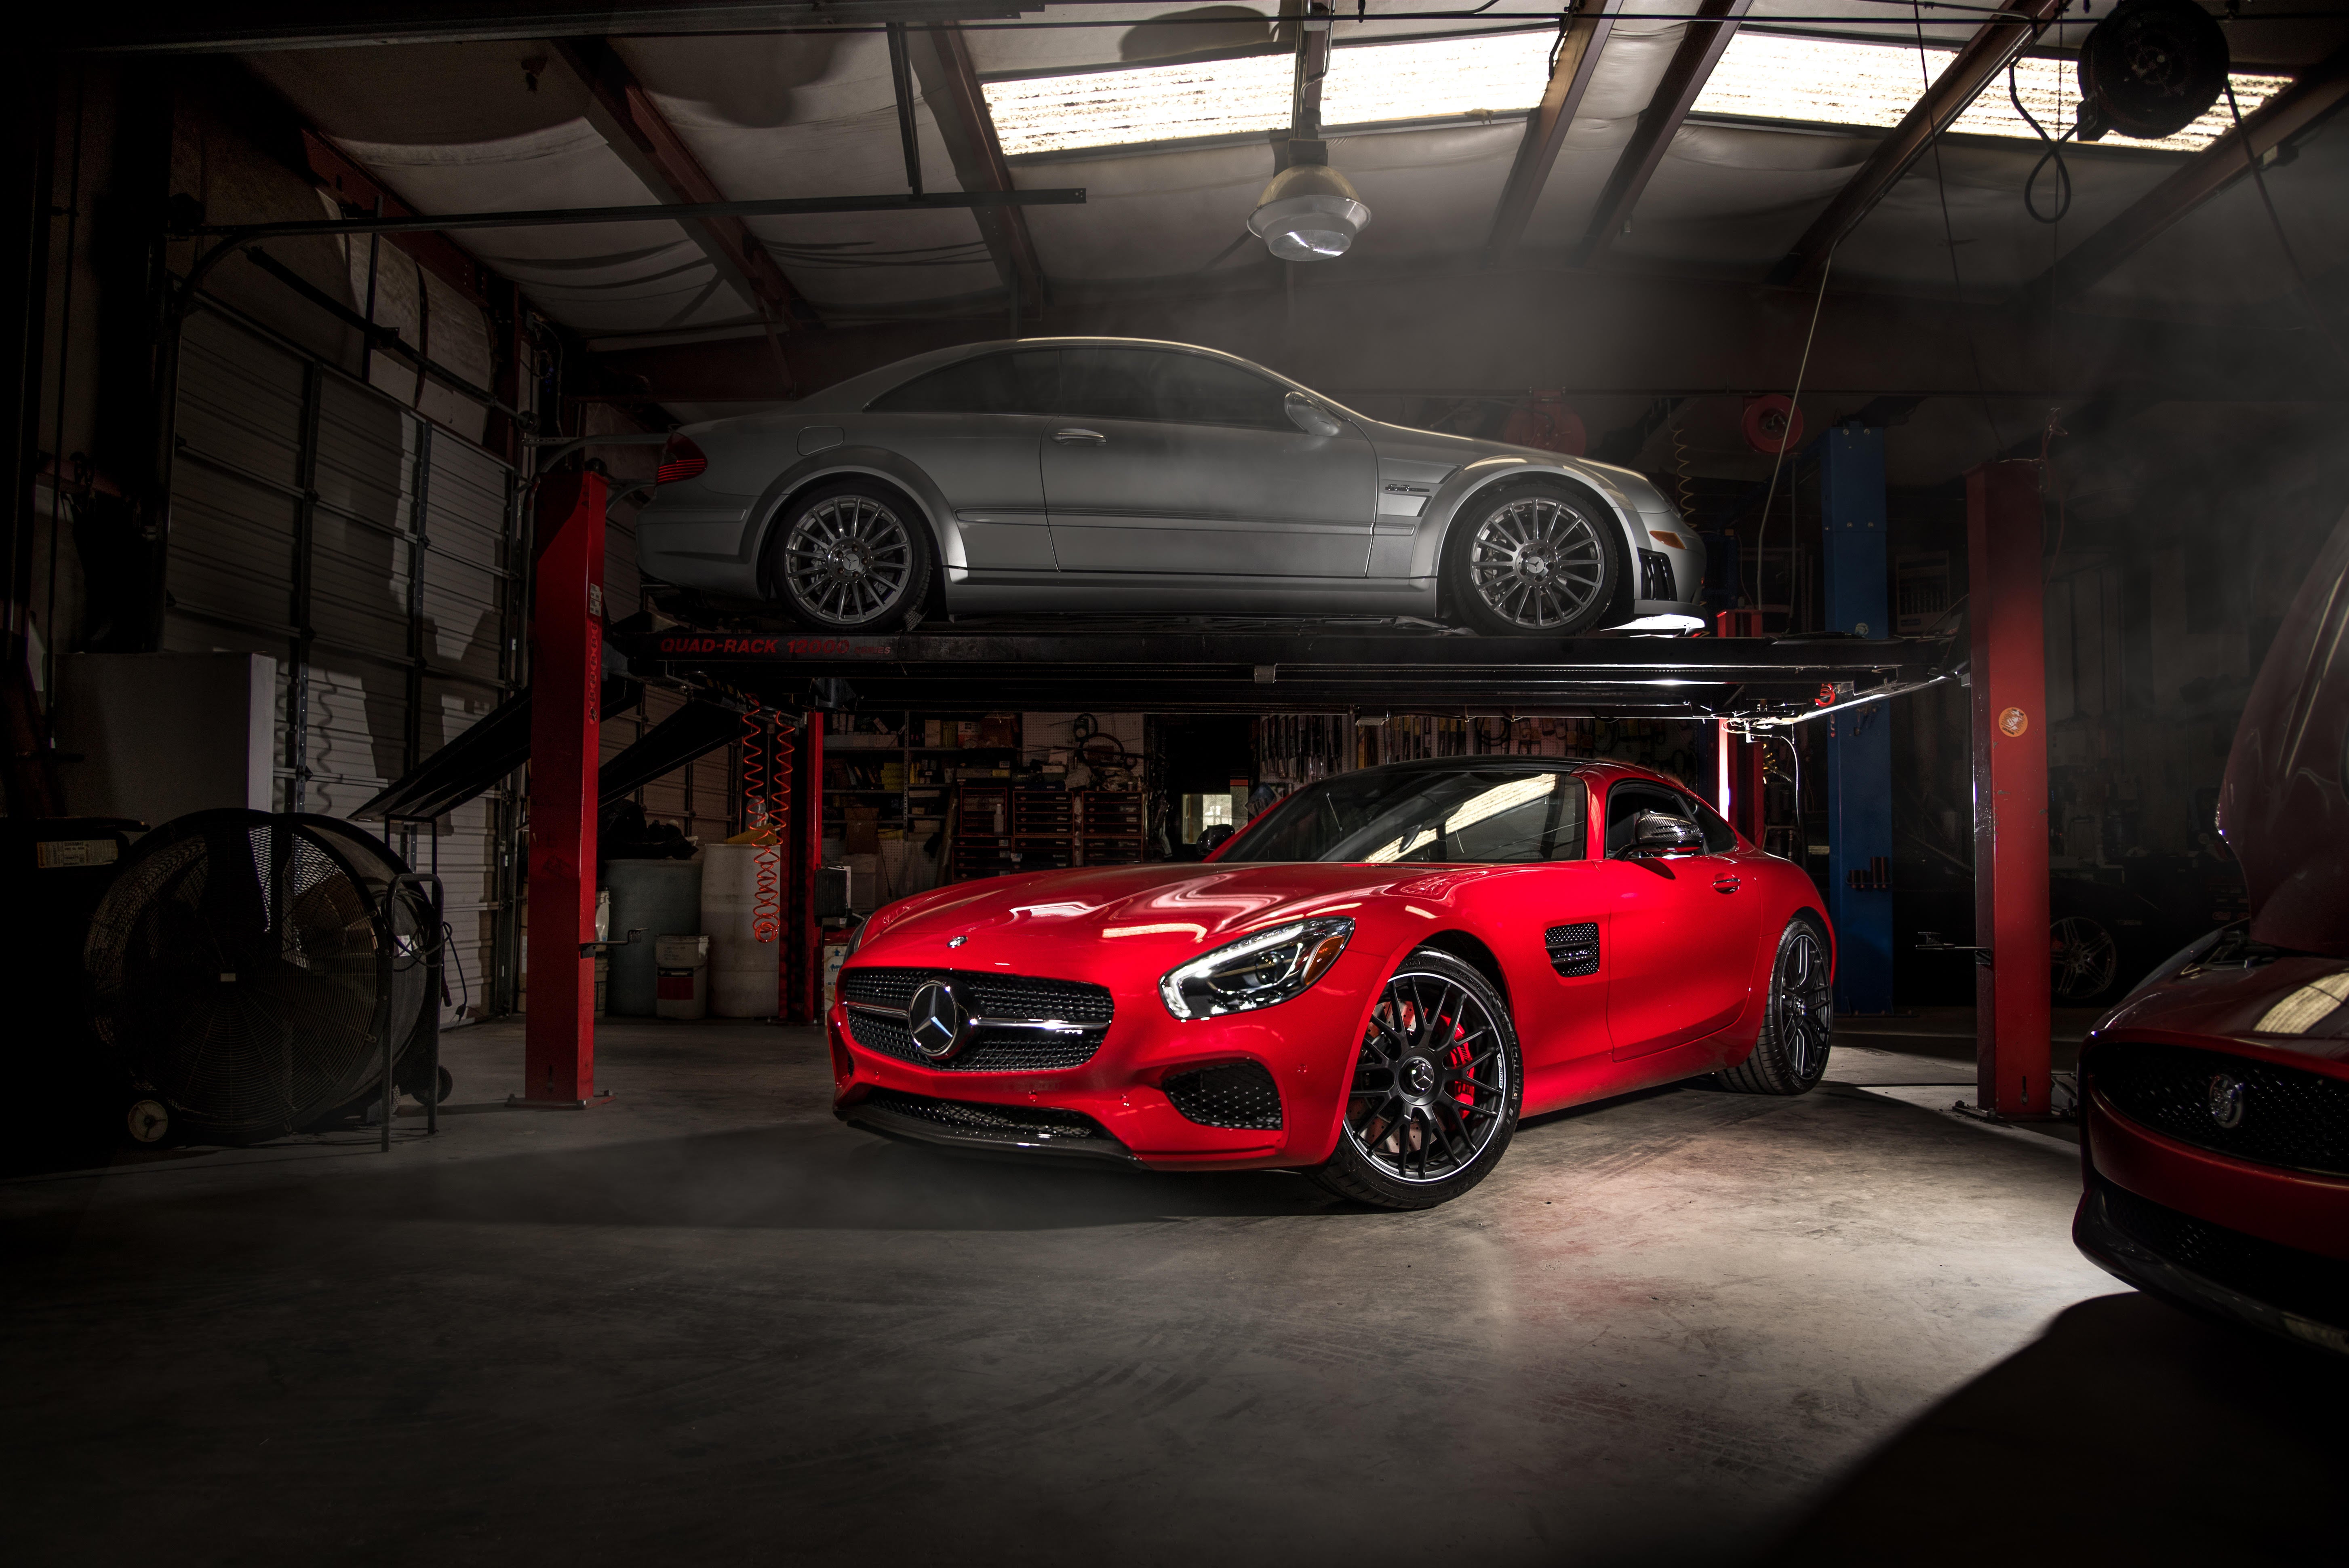 Your Ridiculously Awesome Mercedes-AMG GT Wallpapers Are Here - 5813 x 3880 jpeg 1647kB